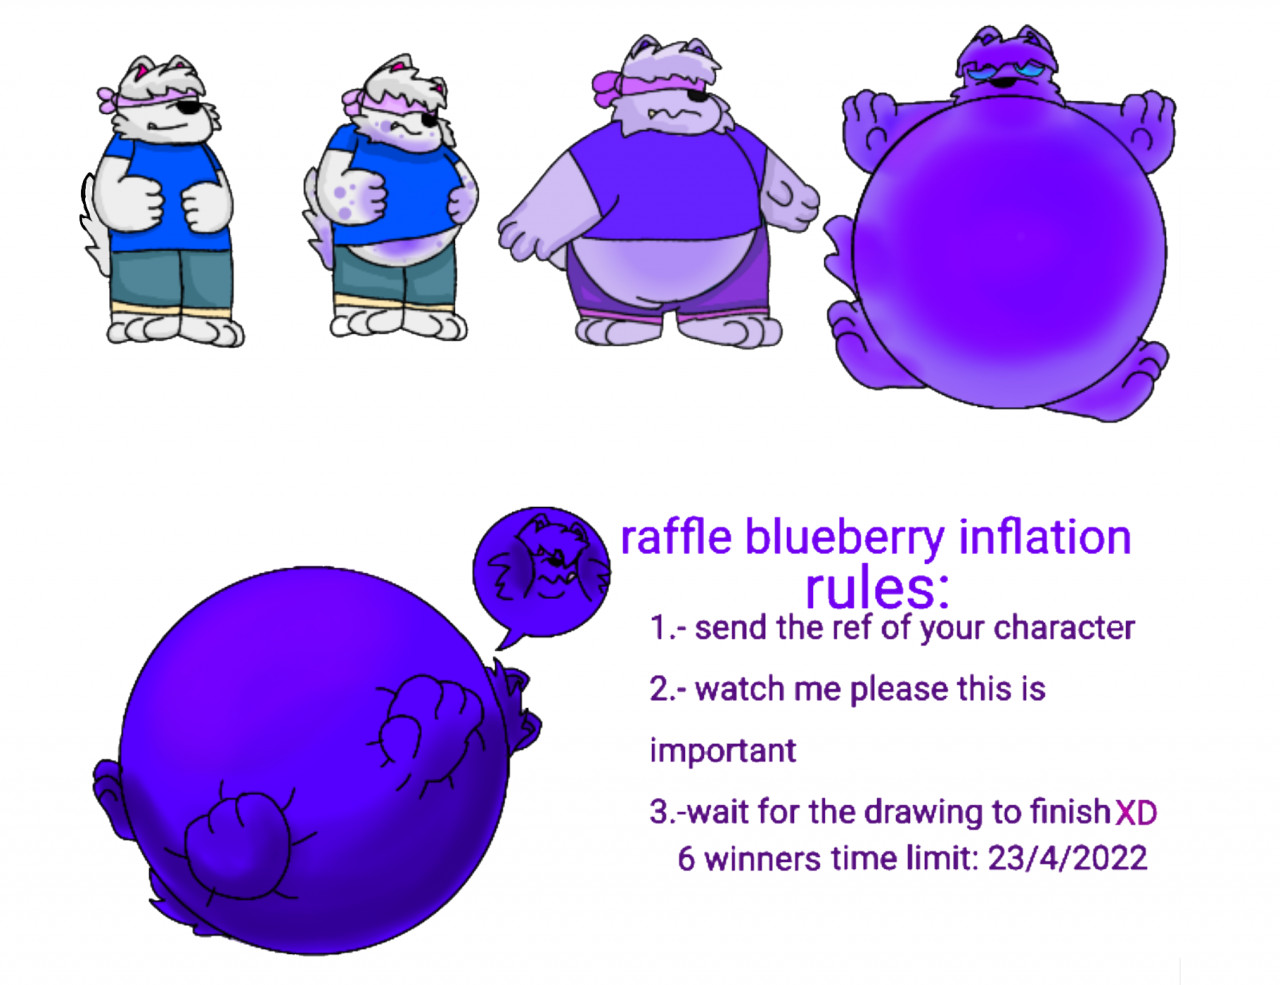 blueberryinflation